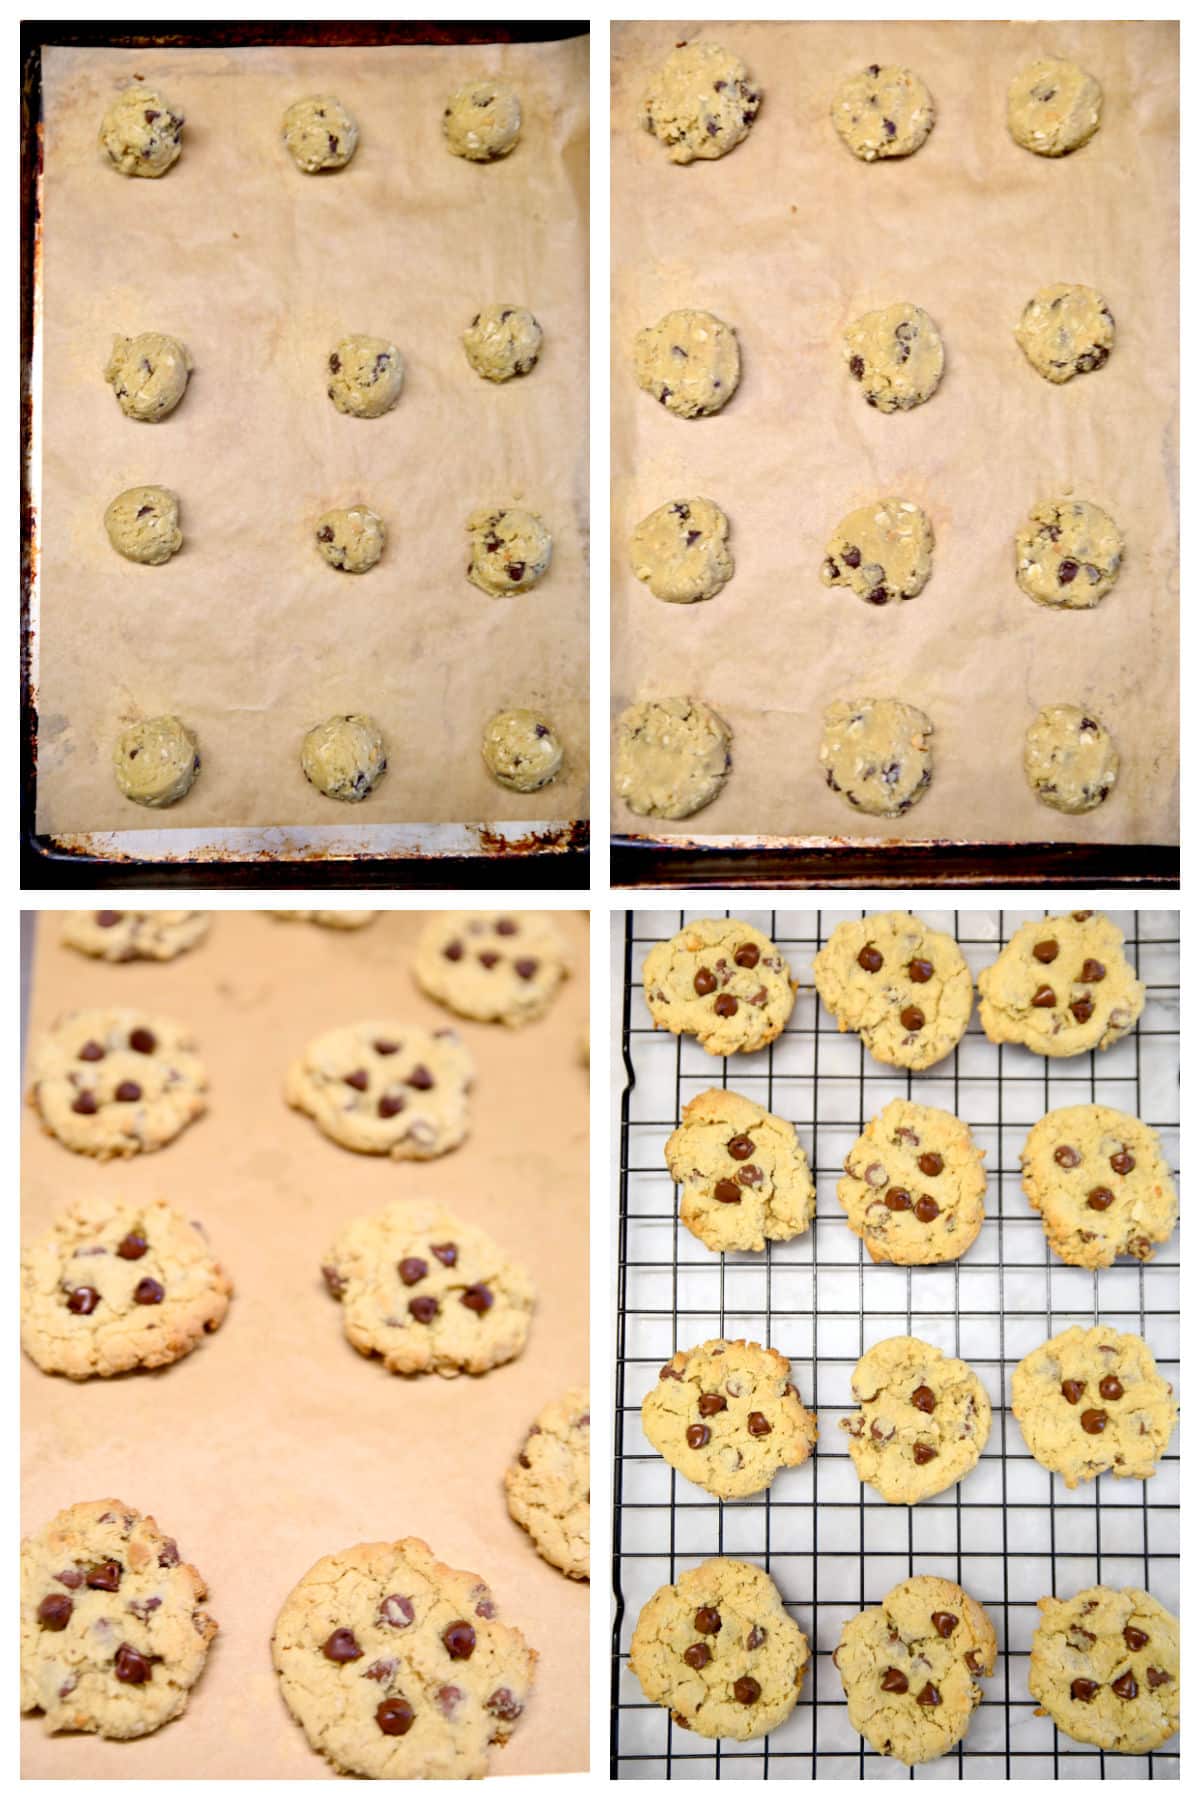 Collage of peanut butter chocolate chip cookie dough on a cookie sheet, baking.